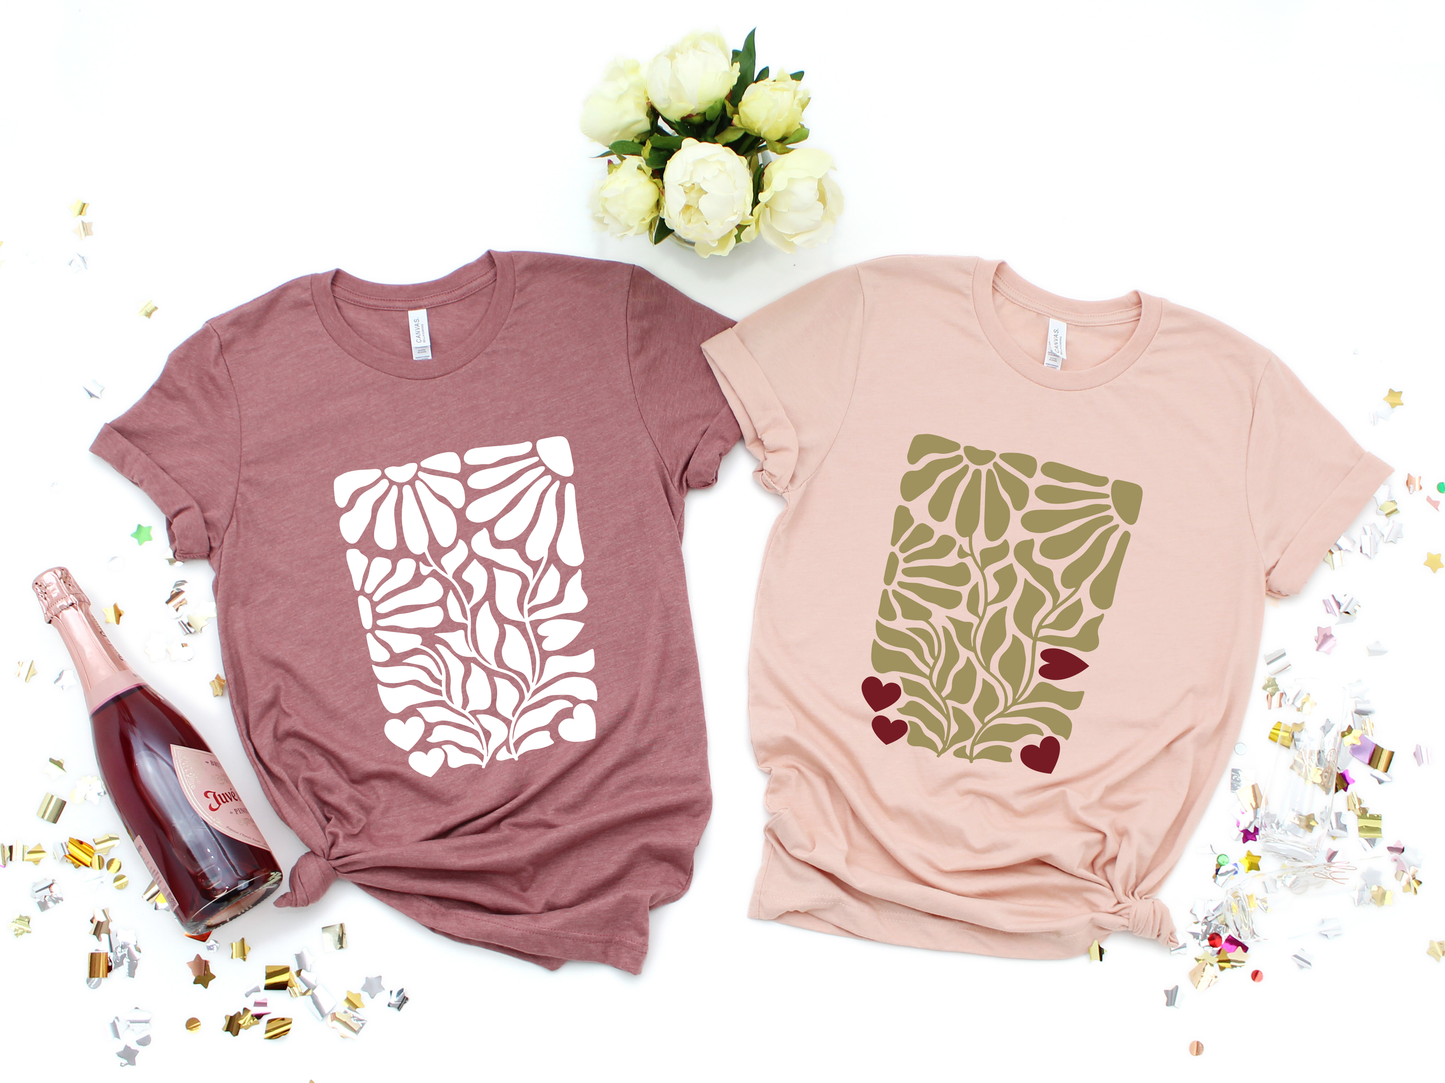 Celebrate the free-spirited vibe of boho style with this unique and eye-catching "Boho Wildflowers" tee.